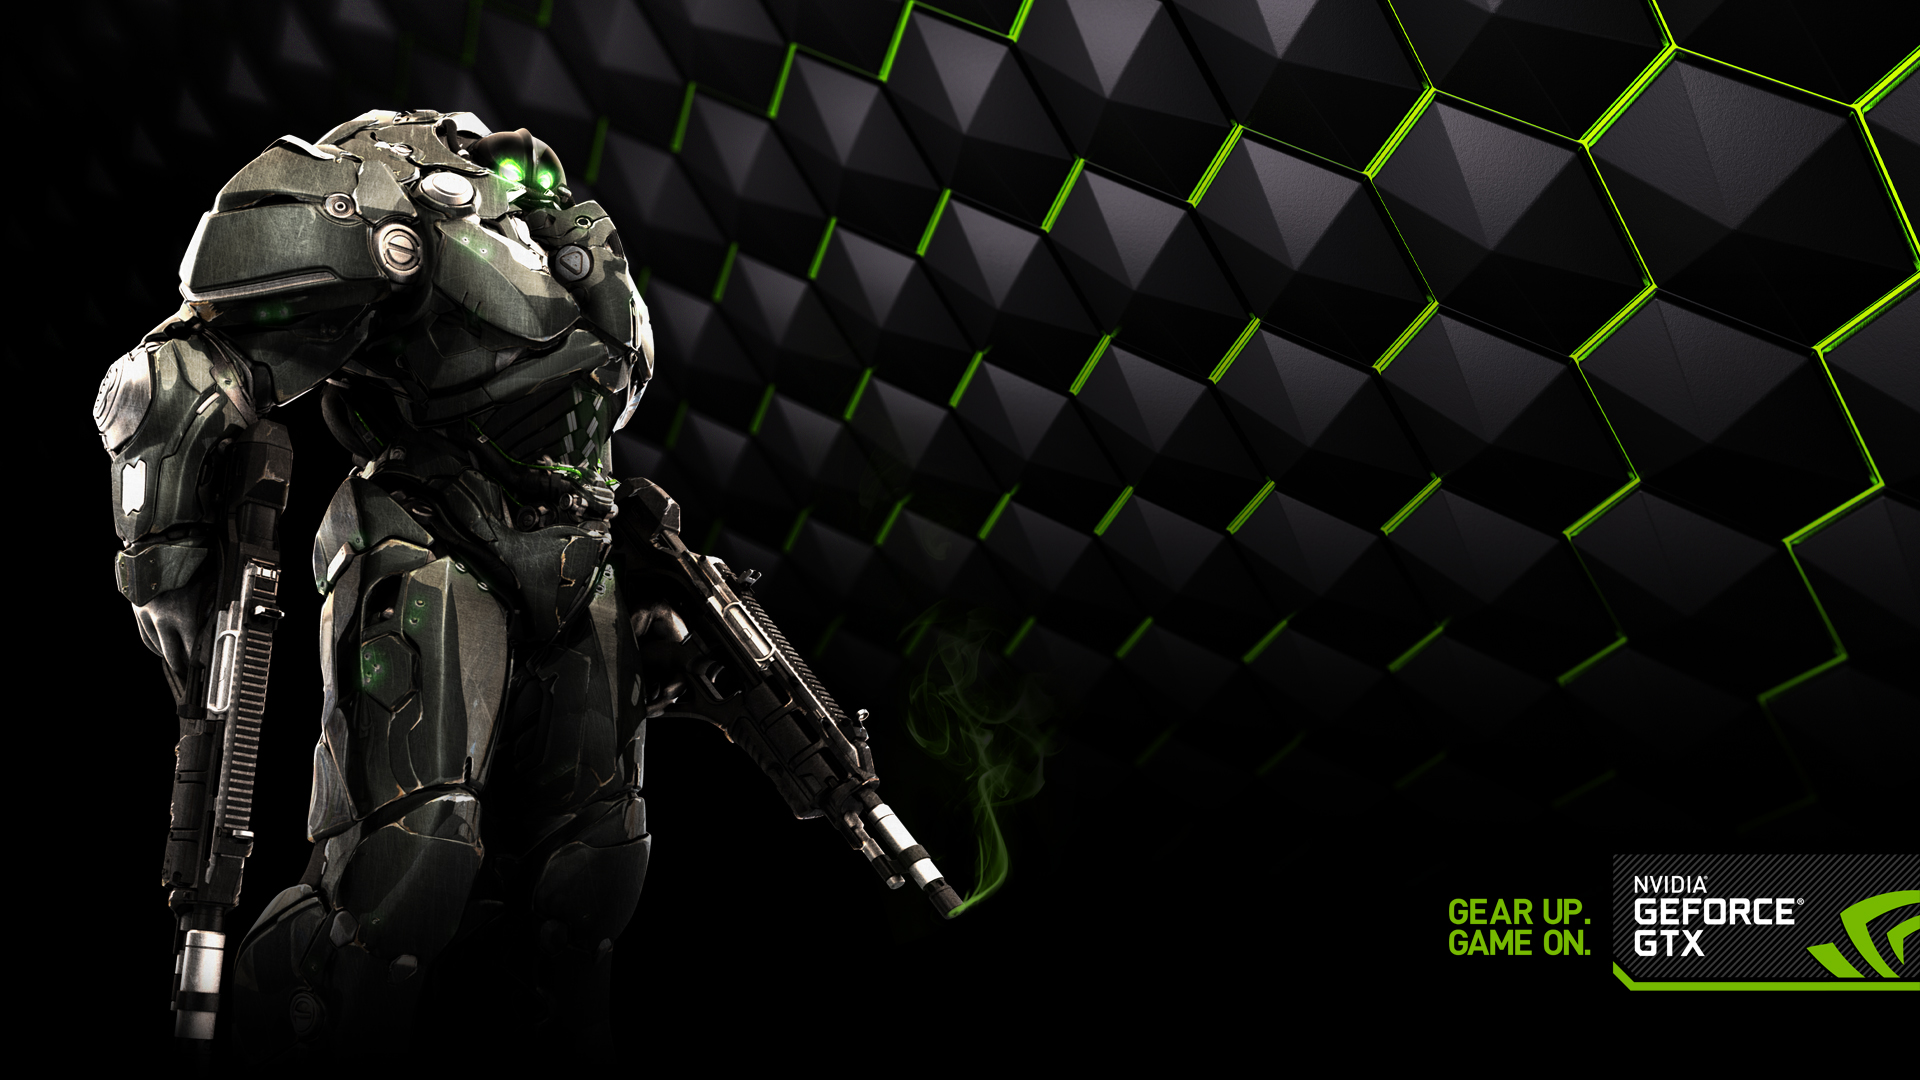 Gear Up Game On Wallpaper Nvidia Cool Stuff